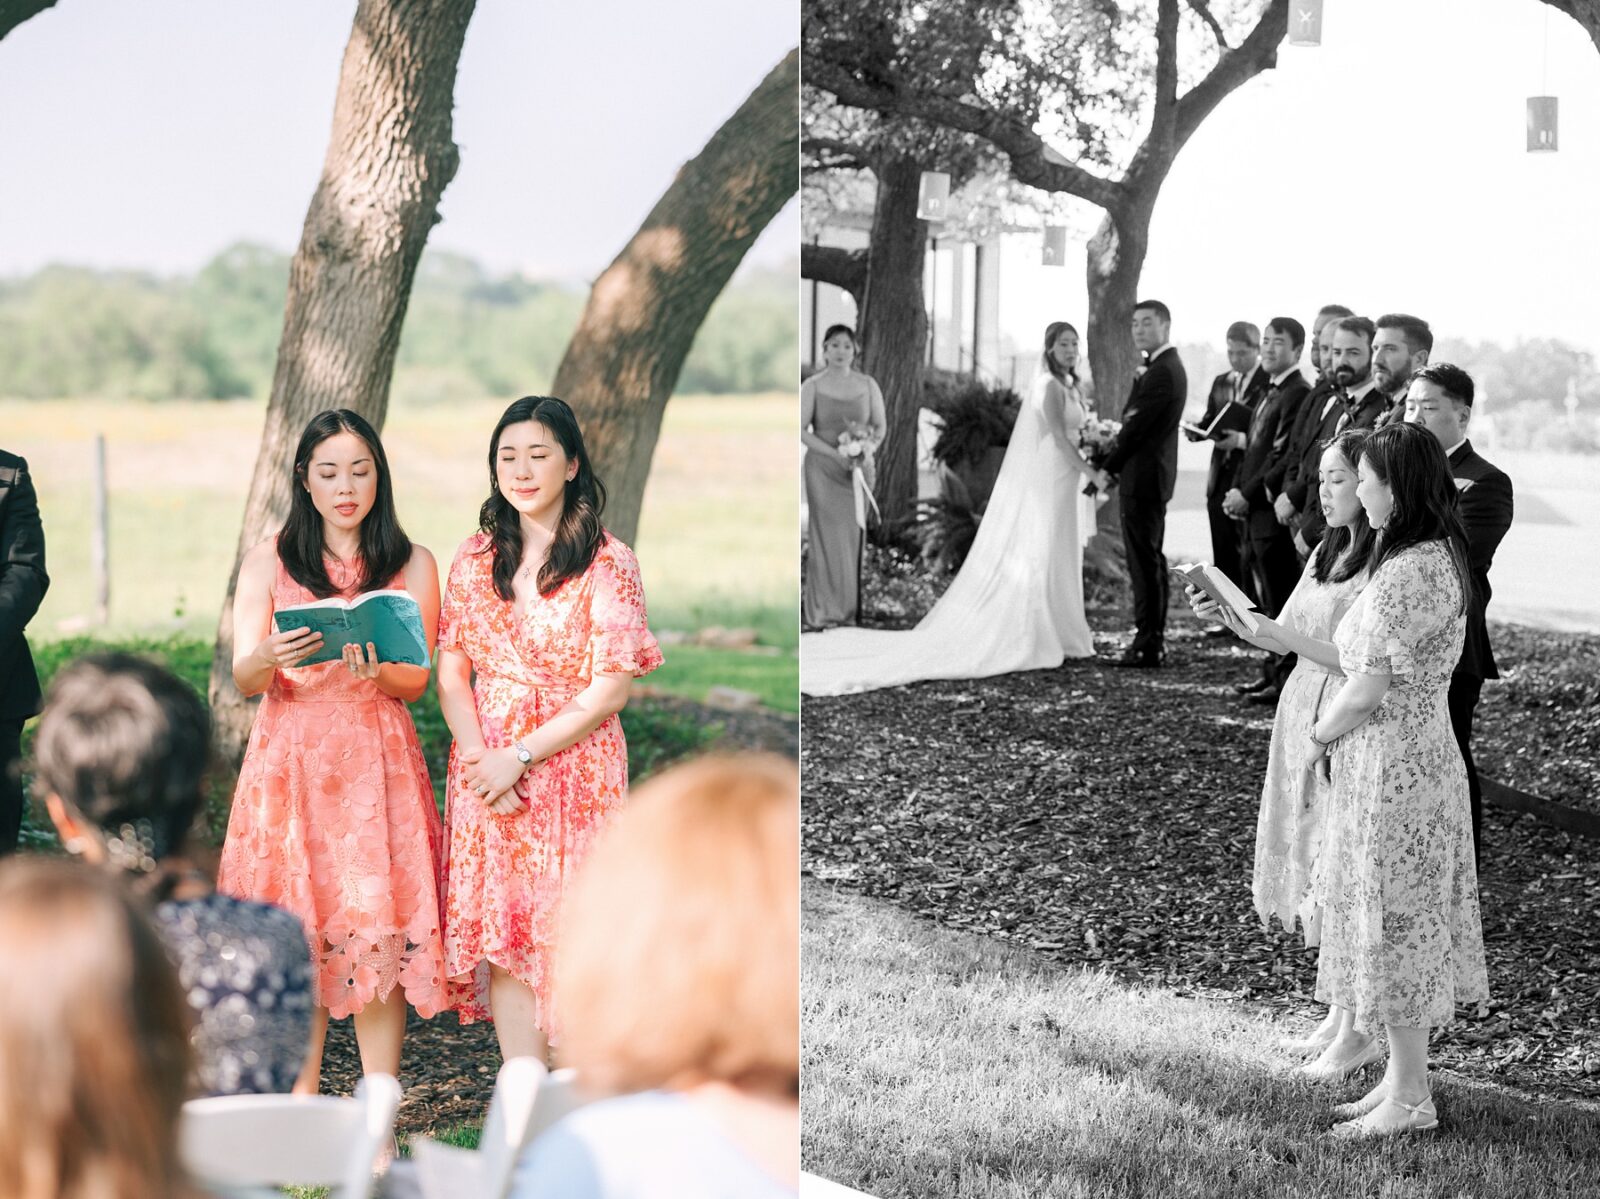 bible reading by sisters, stonehouse villa ceremony space, stonehouse villa wedding ceremony, stonehouse villa, wimberley wedding venue, tara paige weddings, austin wedding photographer